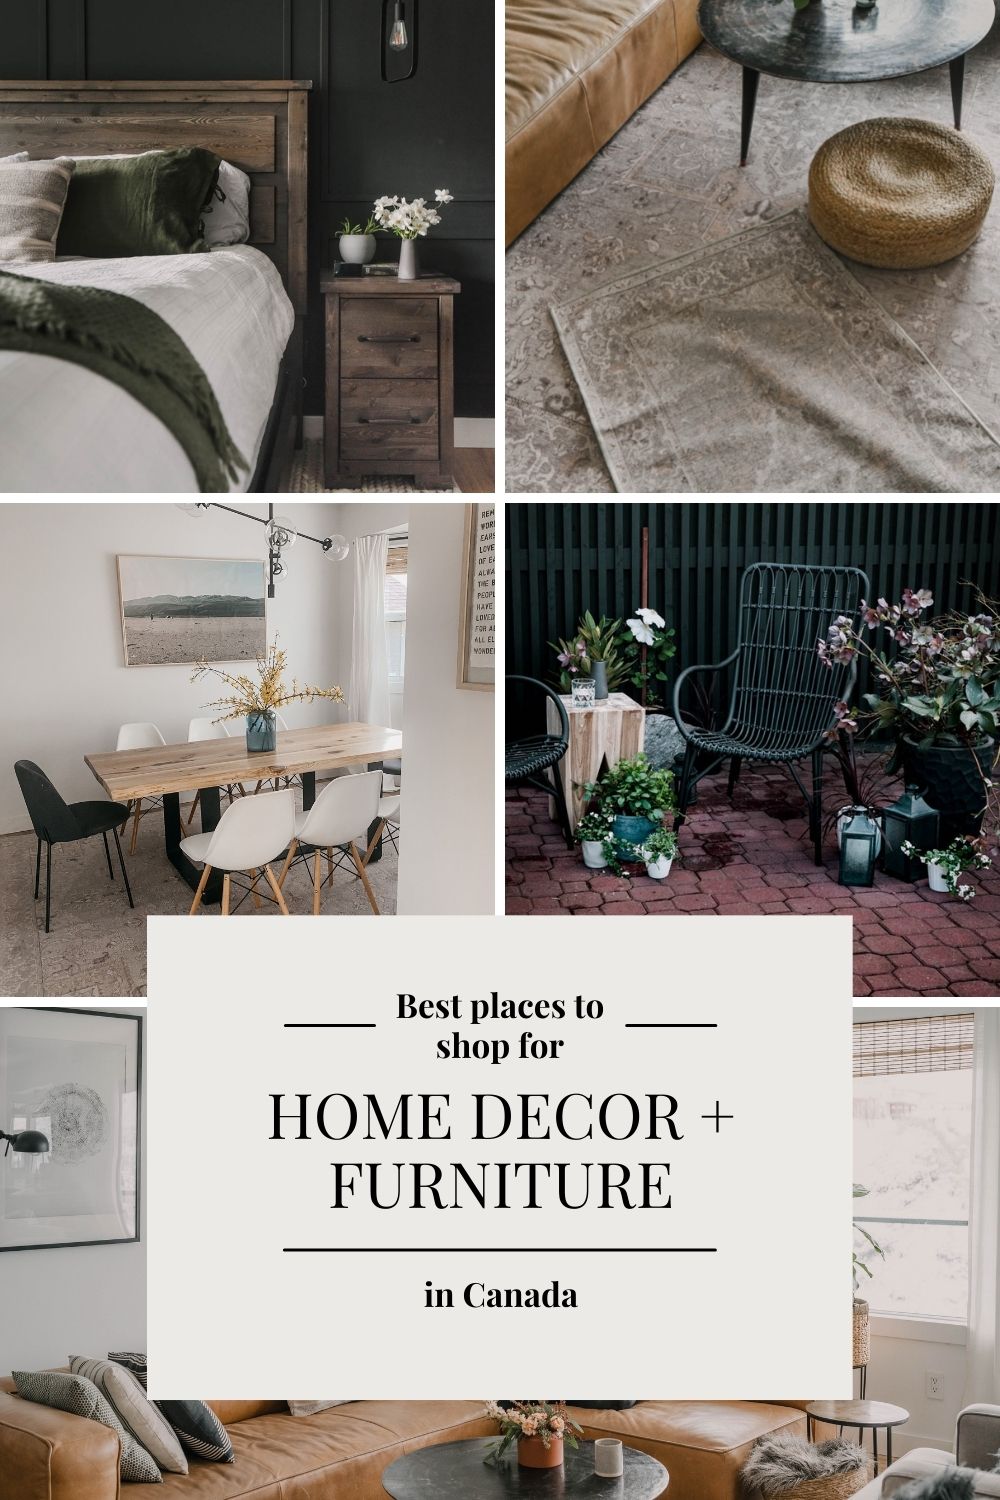 Where to buy home decor and furniture in Canada